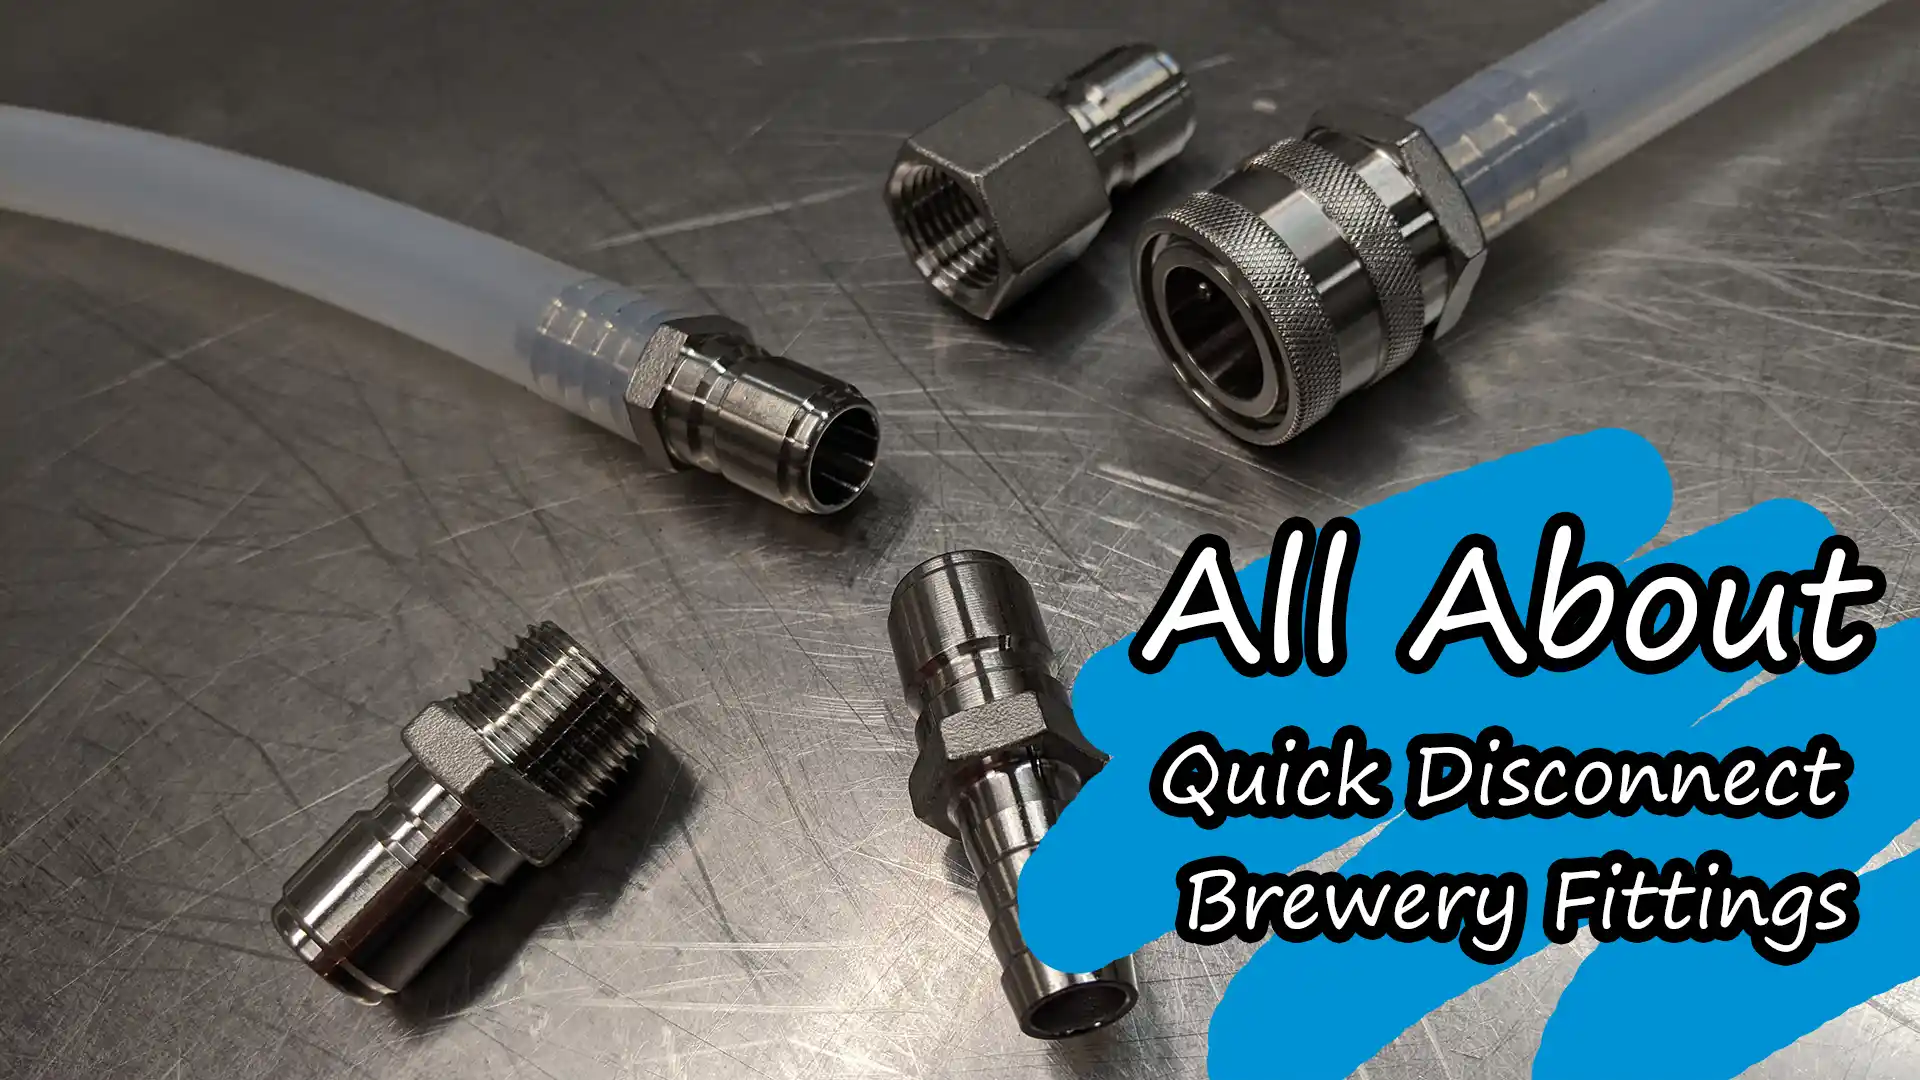 How to disassemble, clean, and maintain quick disconnect fittings in your brewery.